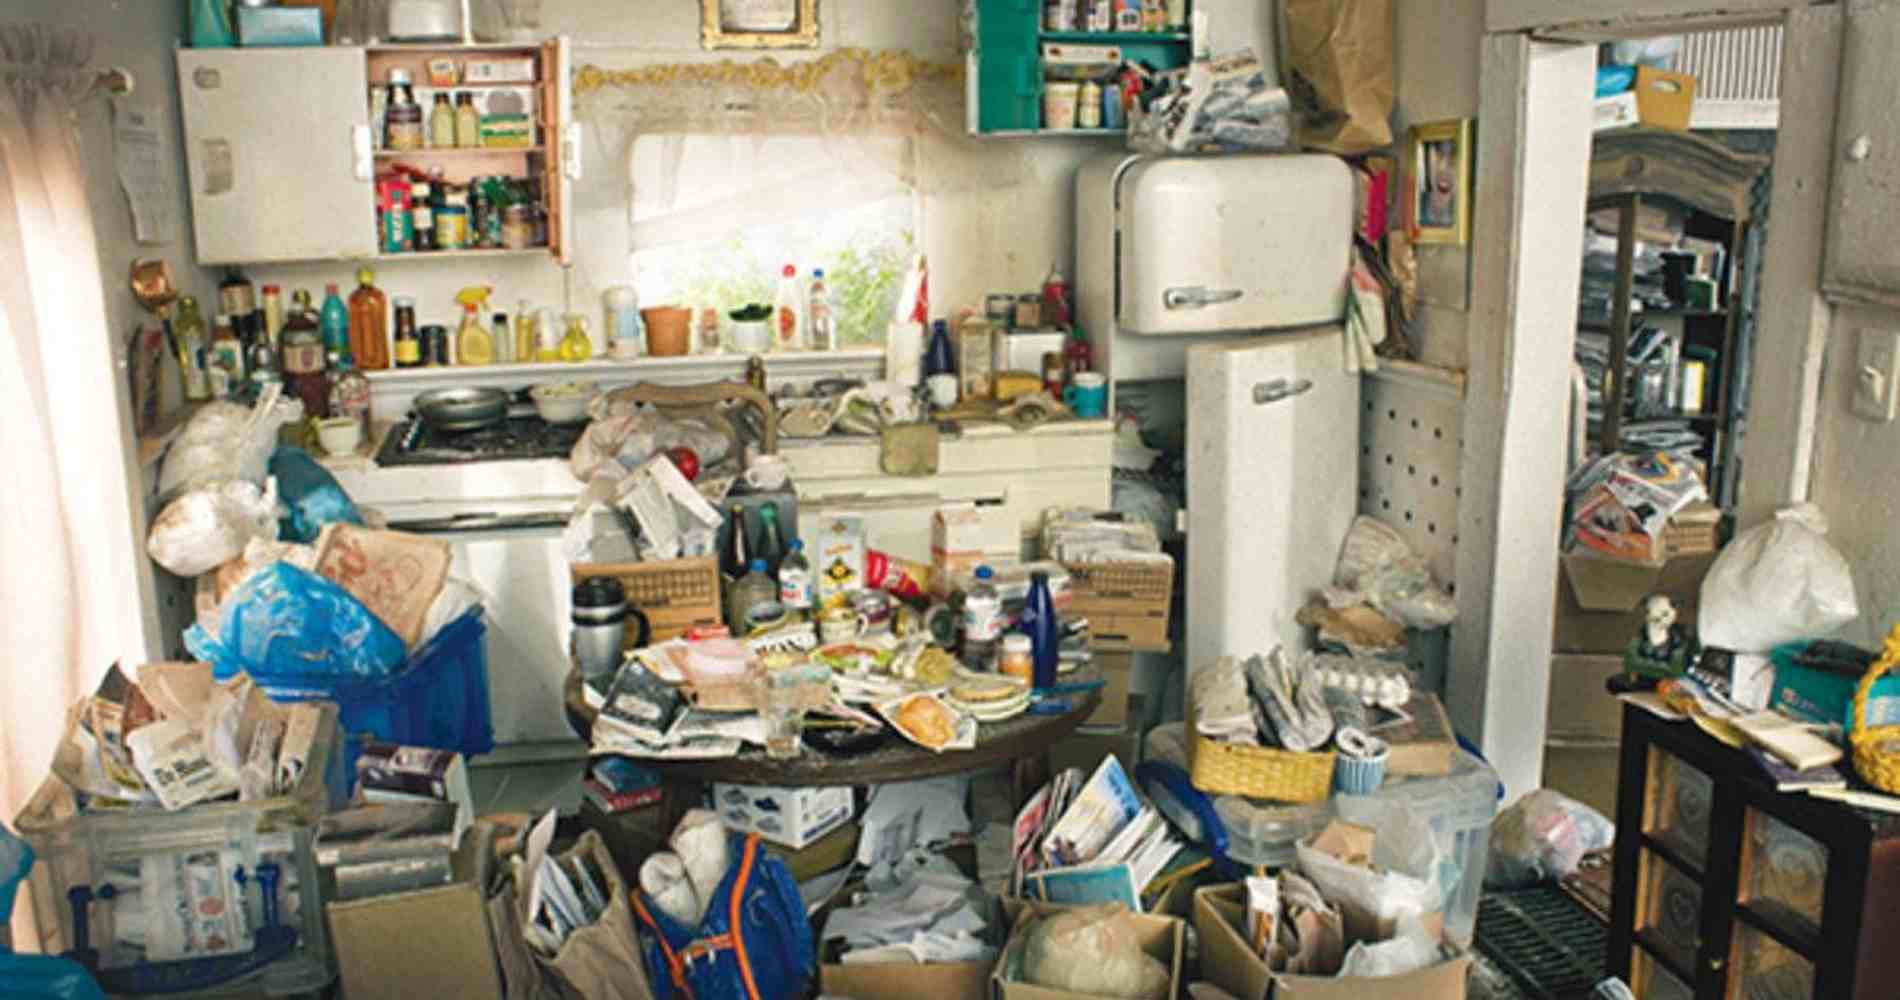 #1 for Hoarding Cleanup in Glendale, AZ with Over 1200 5-Star Reviews!